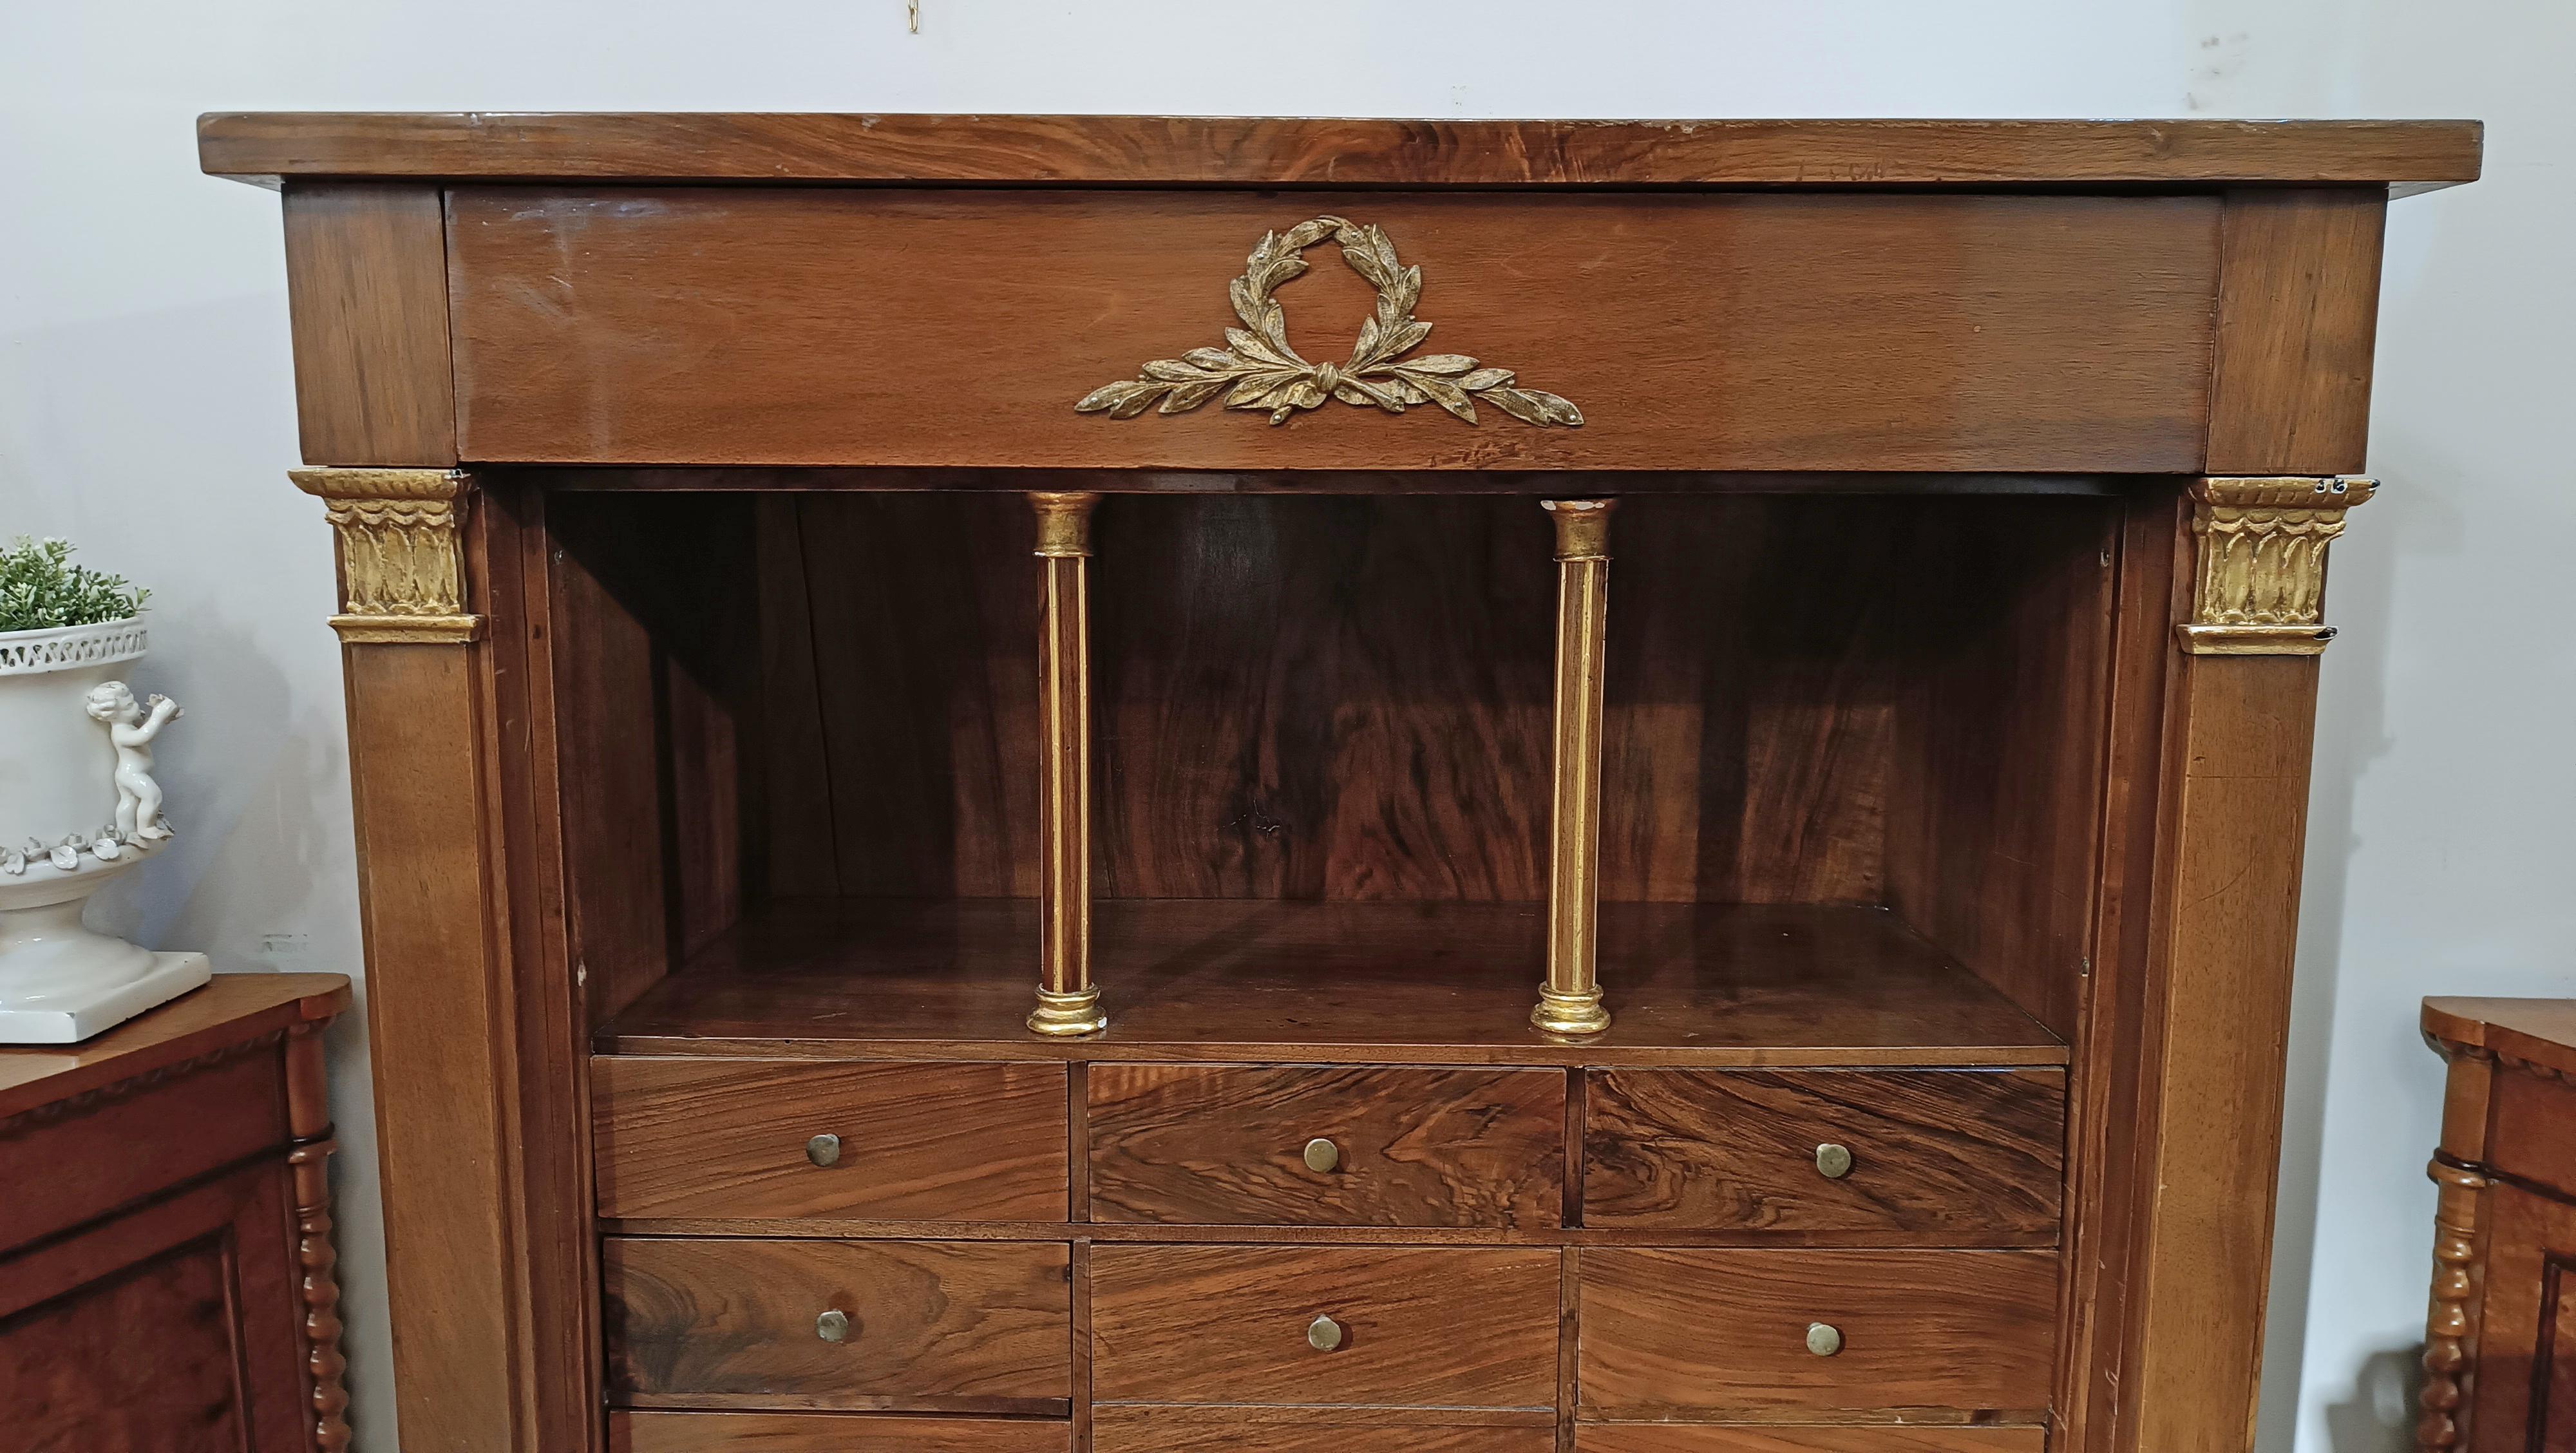 Neoclassical Revival EARLY 19th CENTURY NEOCLASSICAL SECRÉTAIRE IN SOLID WALNUT 